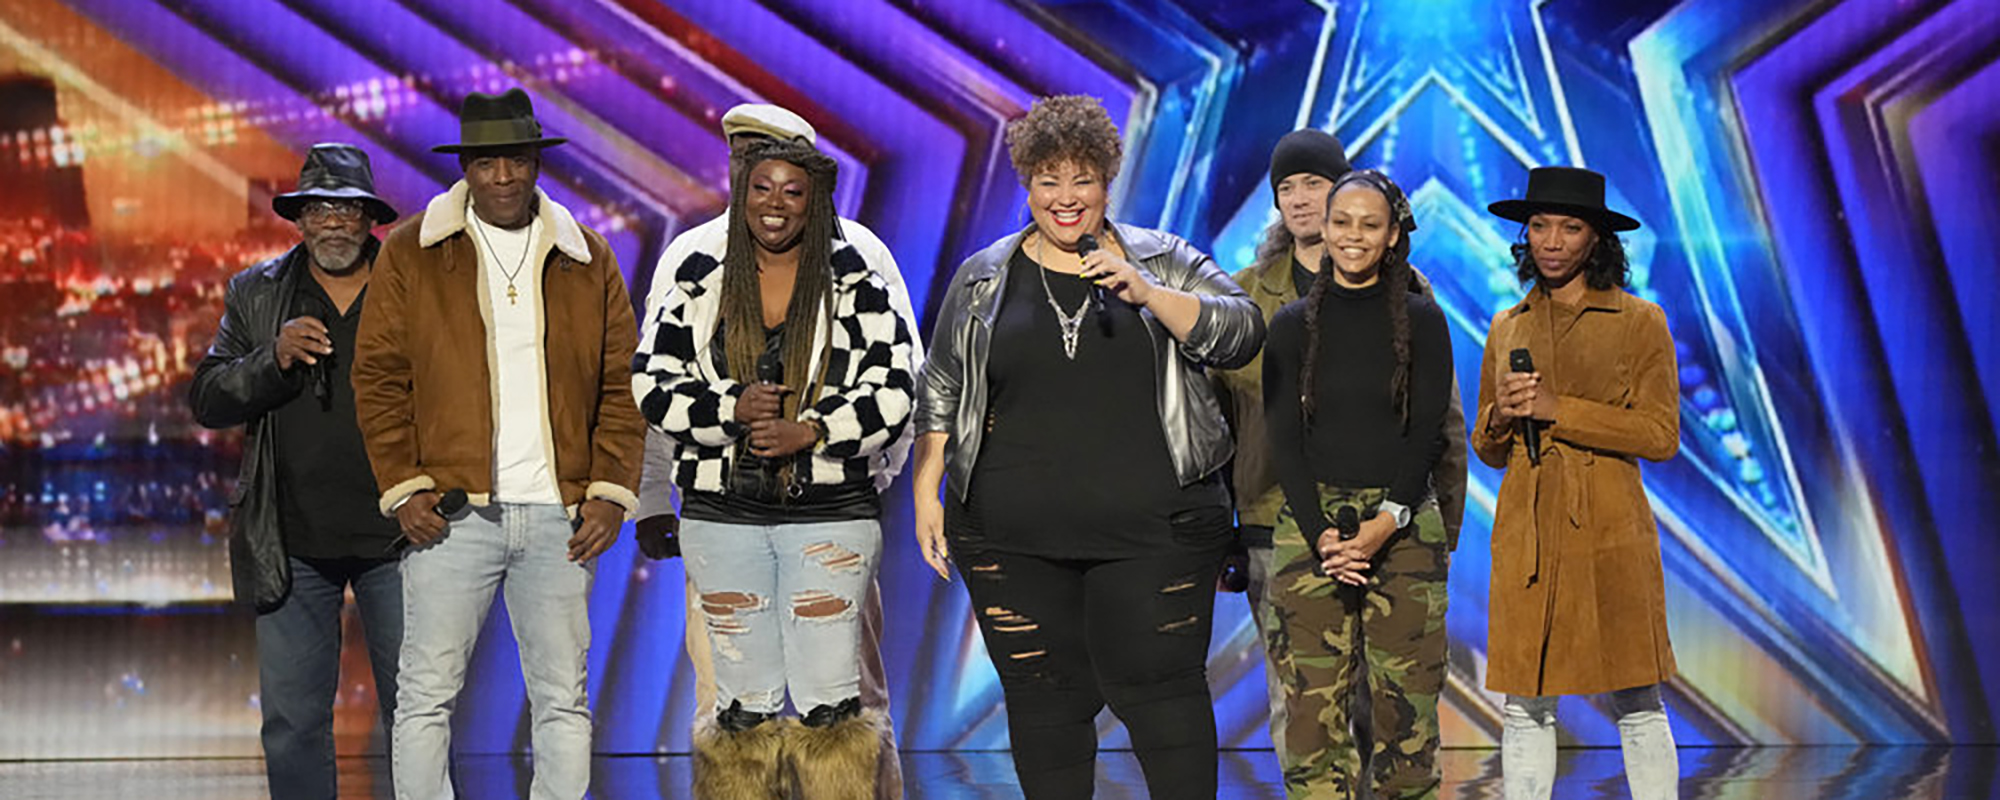 Freedom Singers Offer Moving Story and Audition on ‘America’s Got Talent’